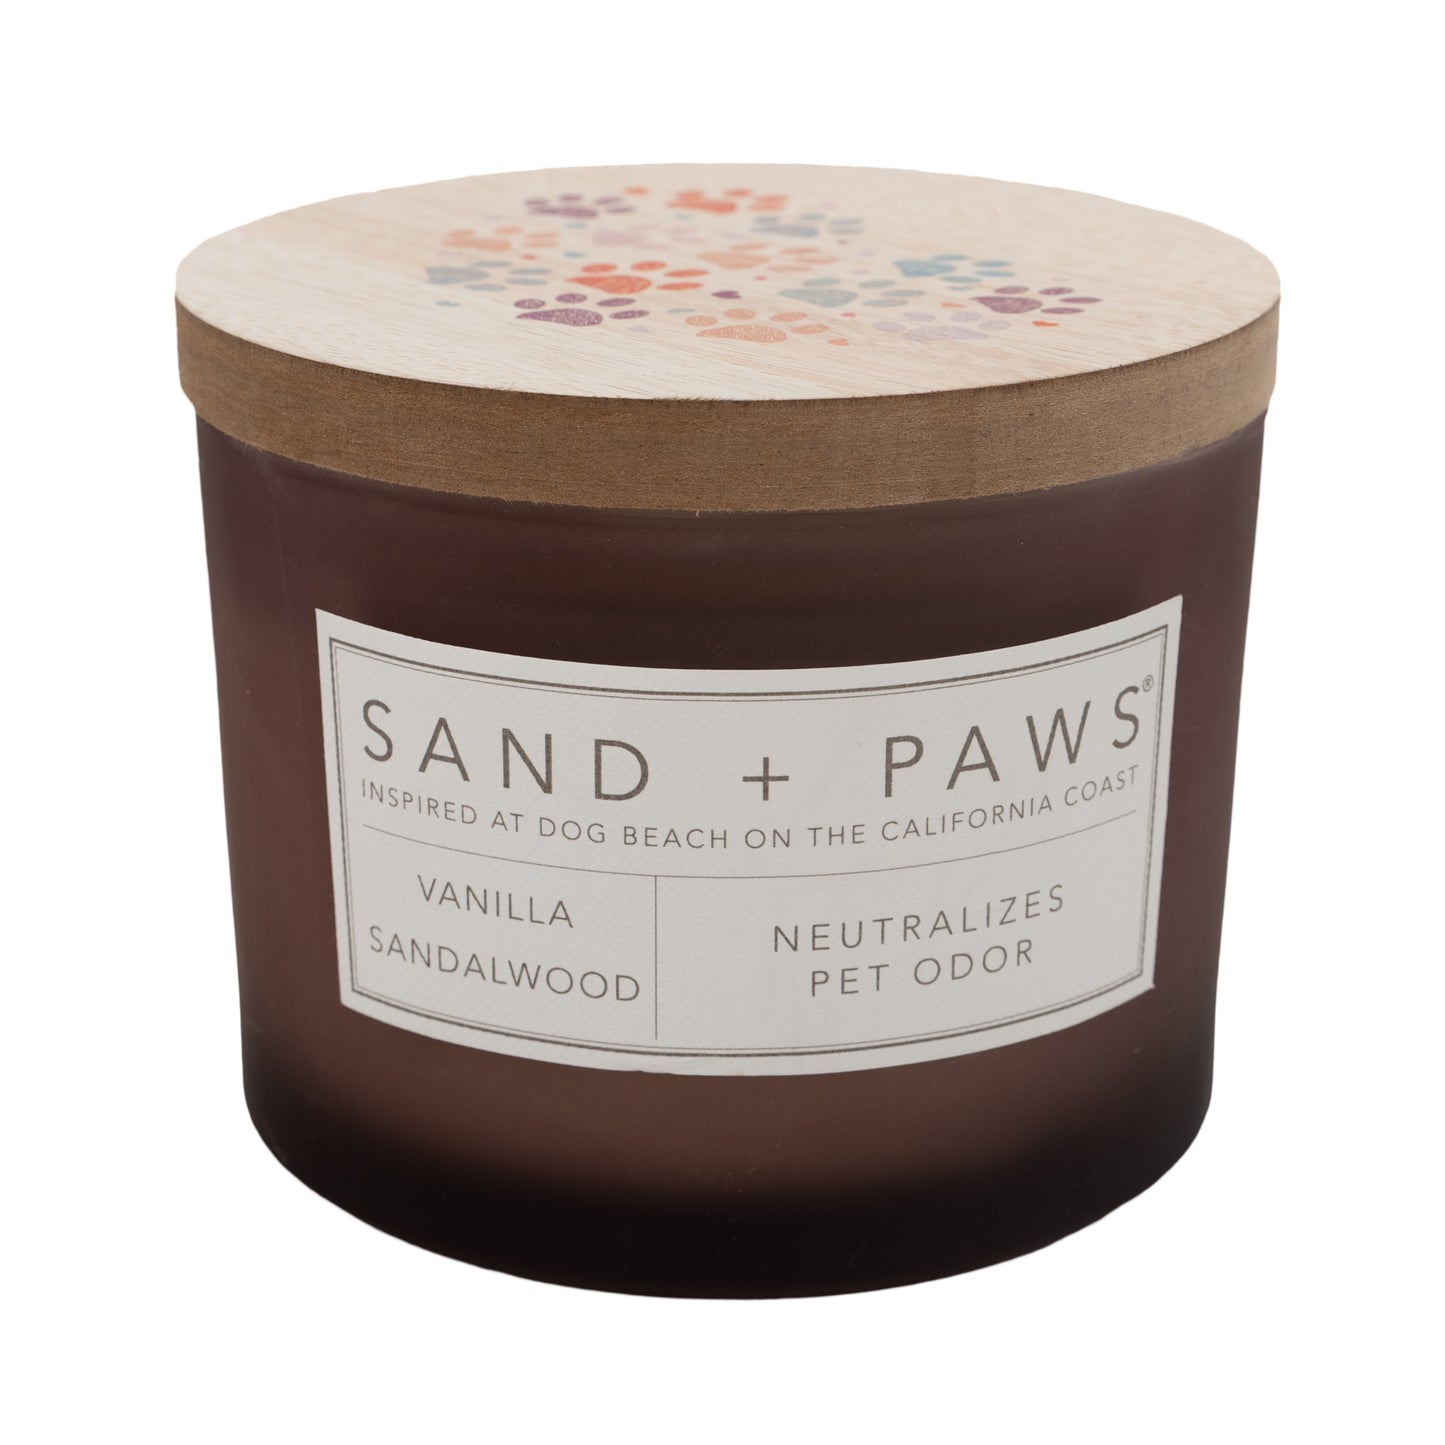 Sand + Paws Pet Odor Candle